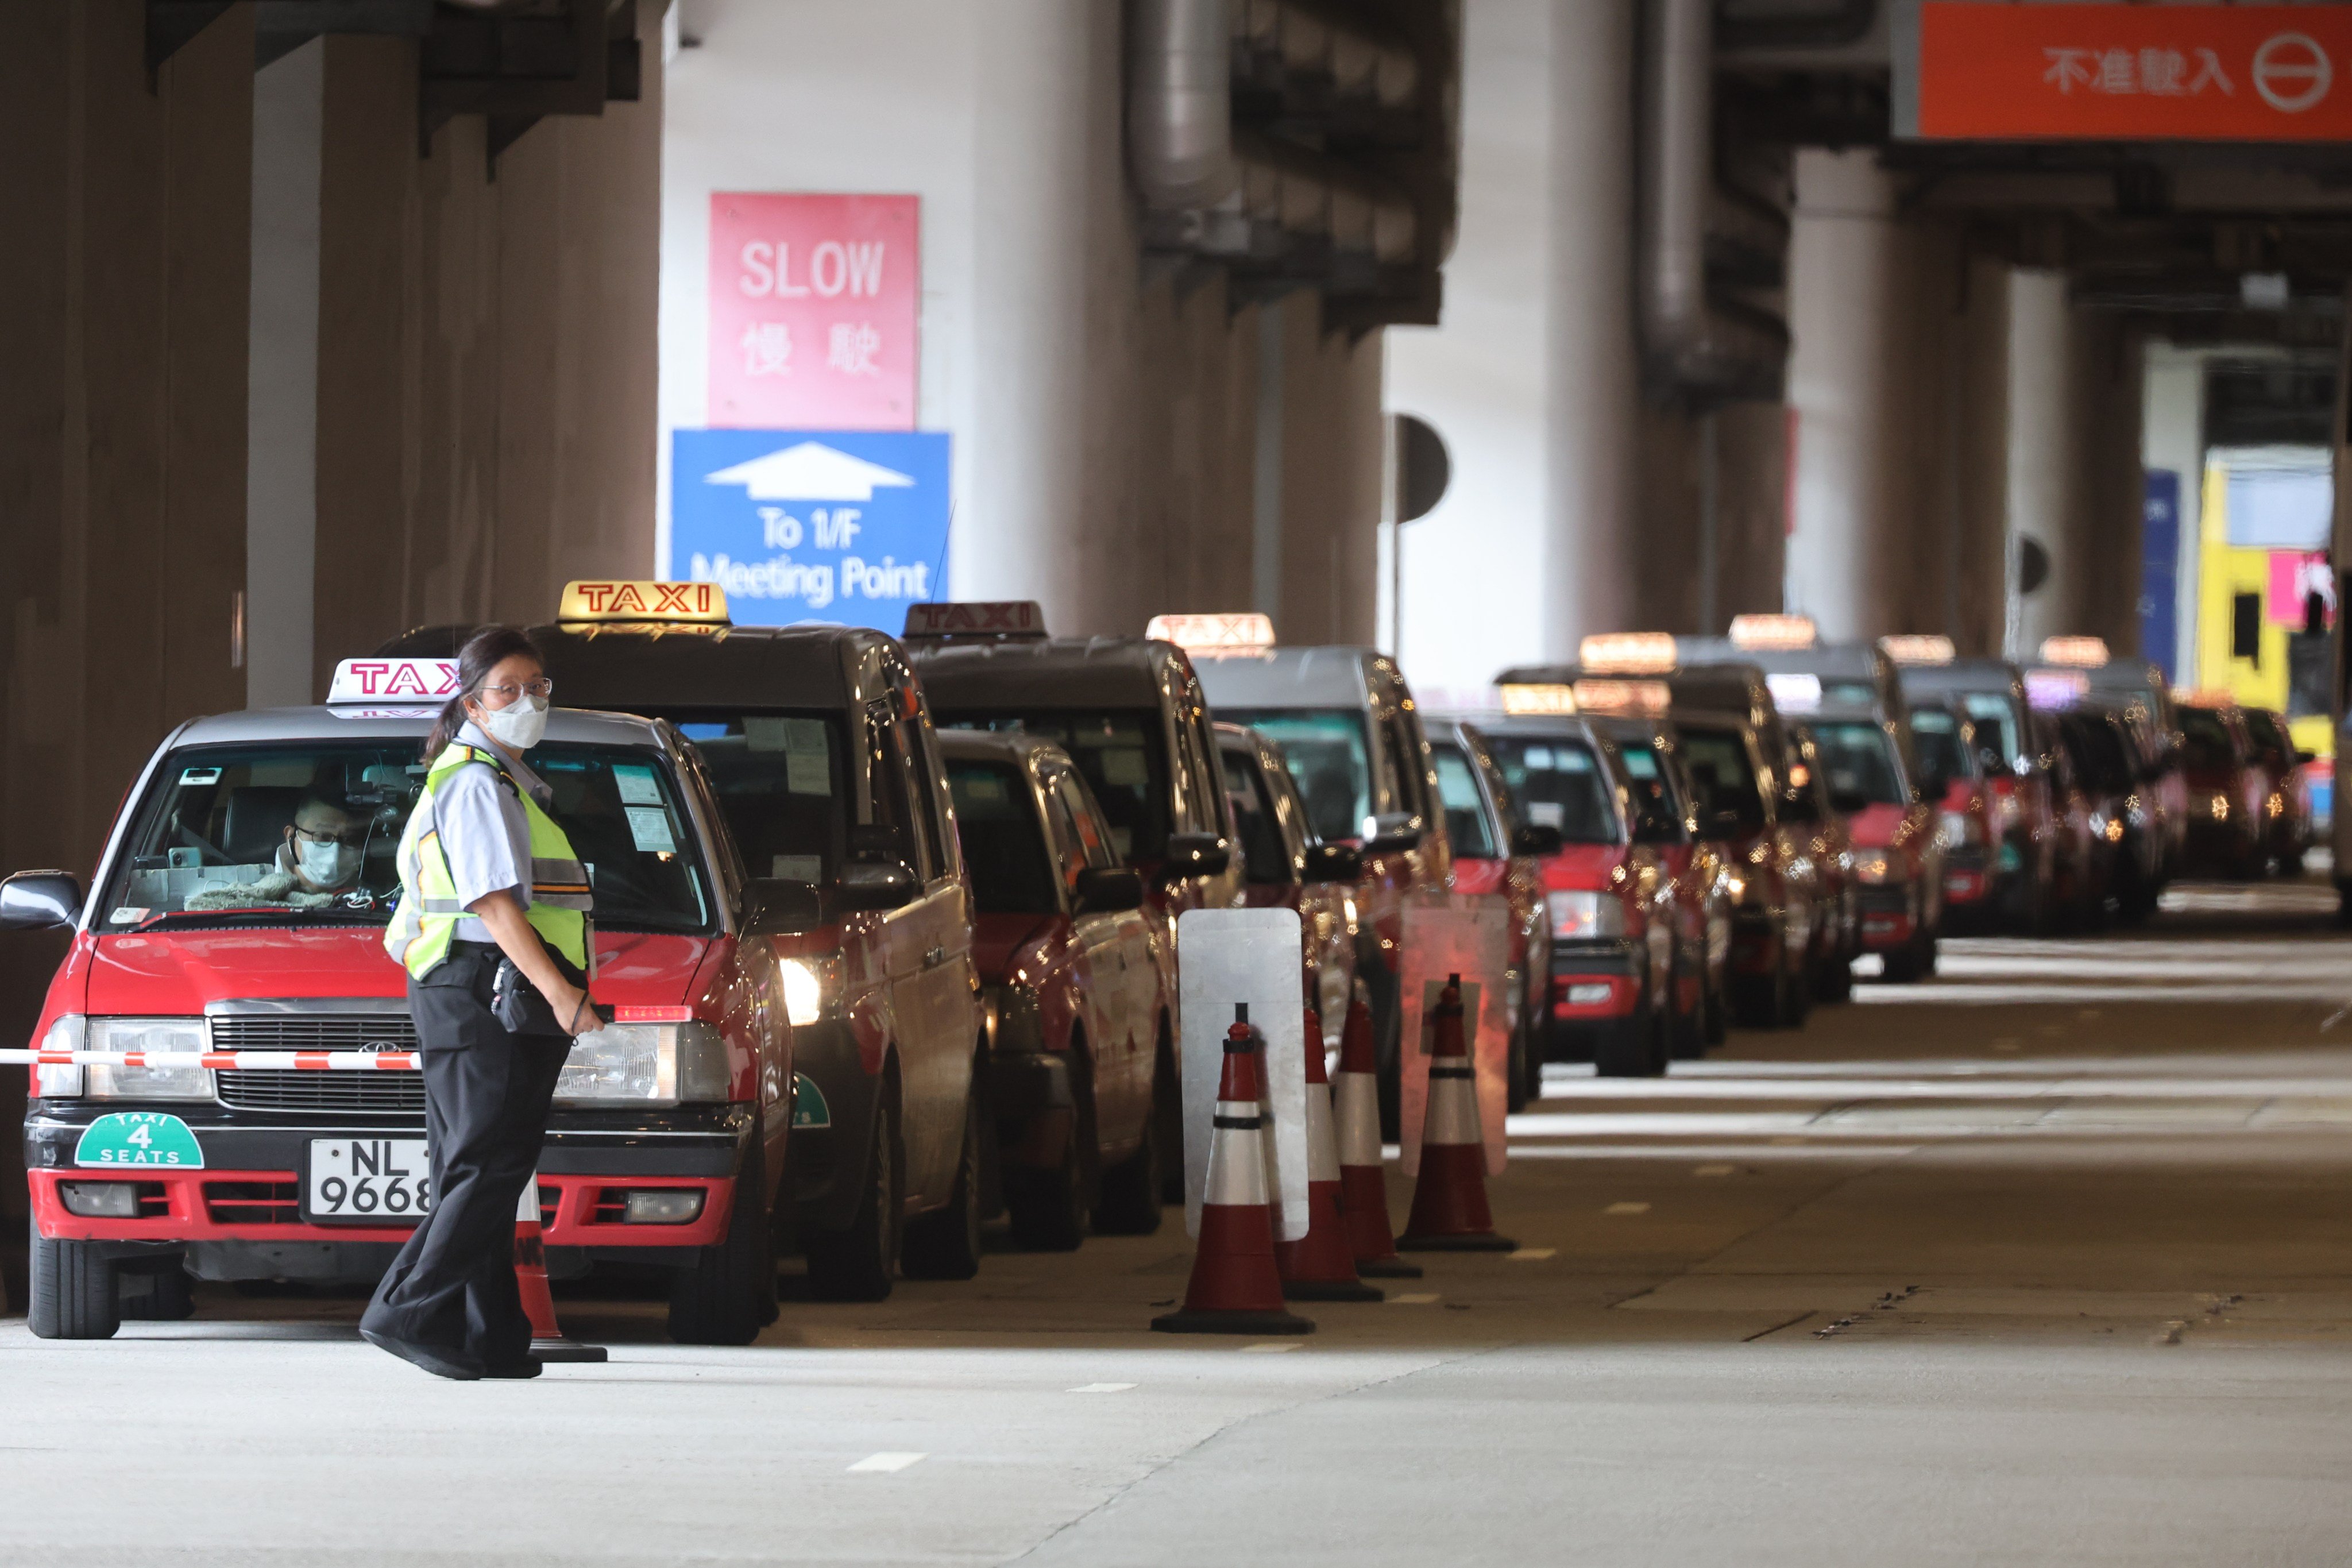 Taxis waiting for passengers. Photo: Edmond So